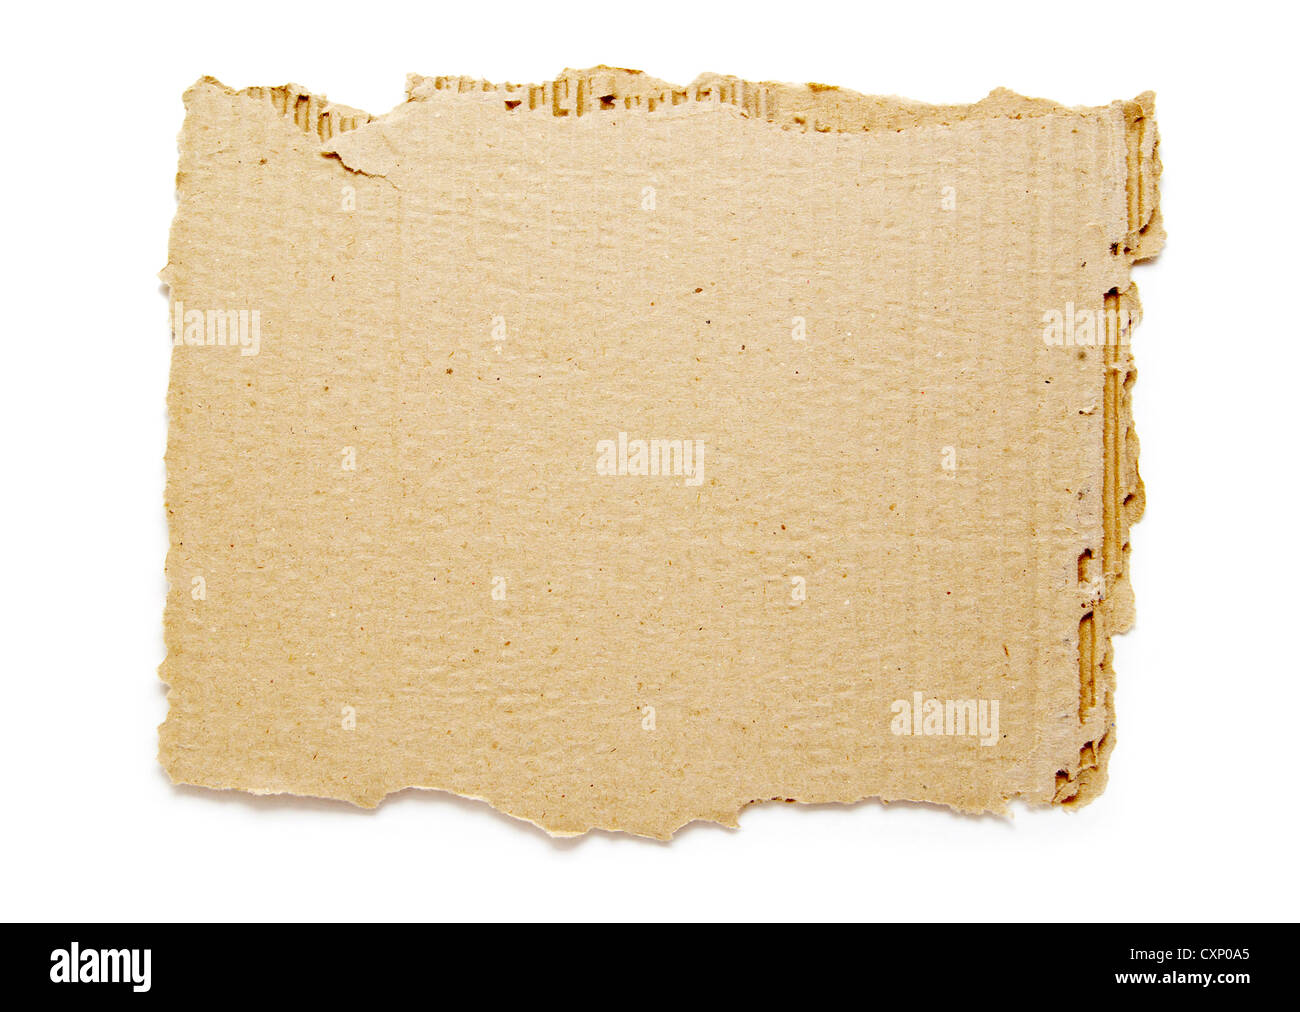 Ripped piece of cardboard on white Stock Photo